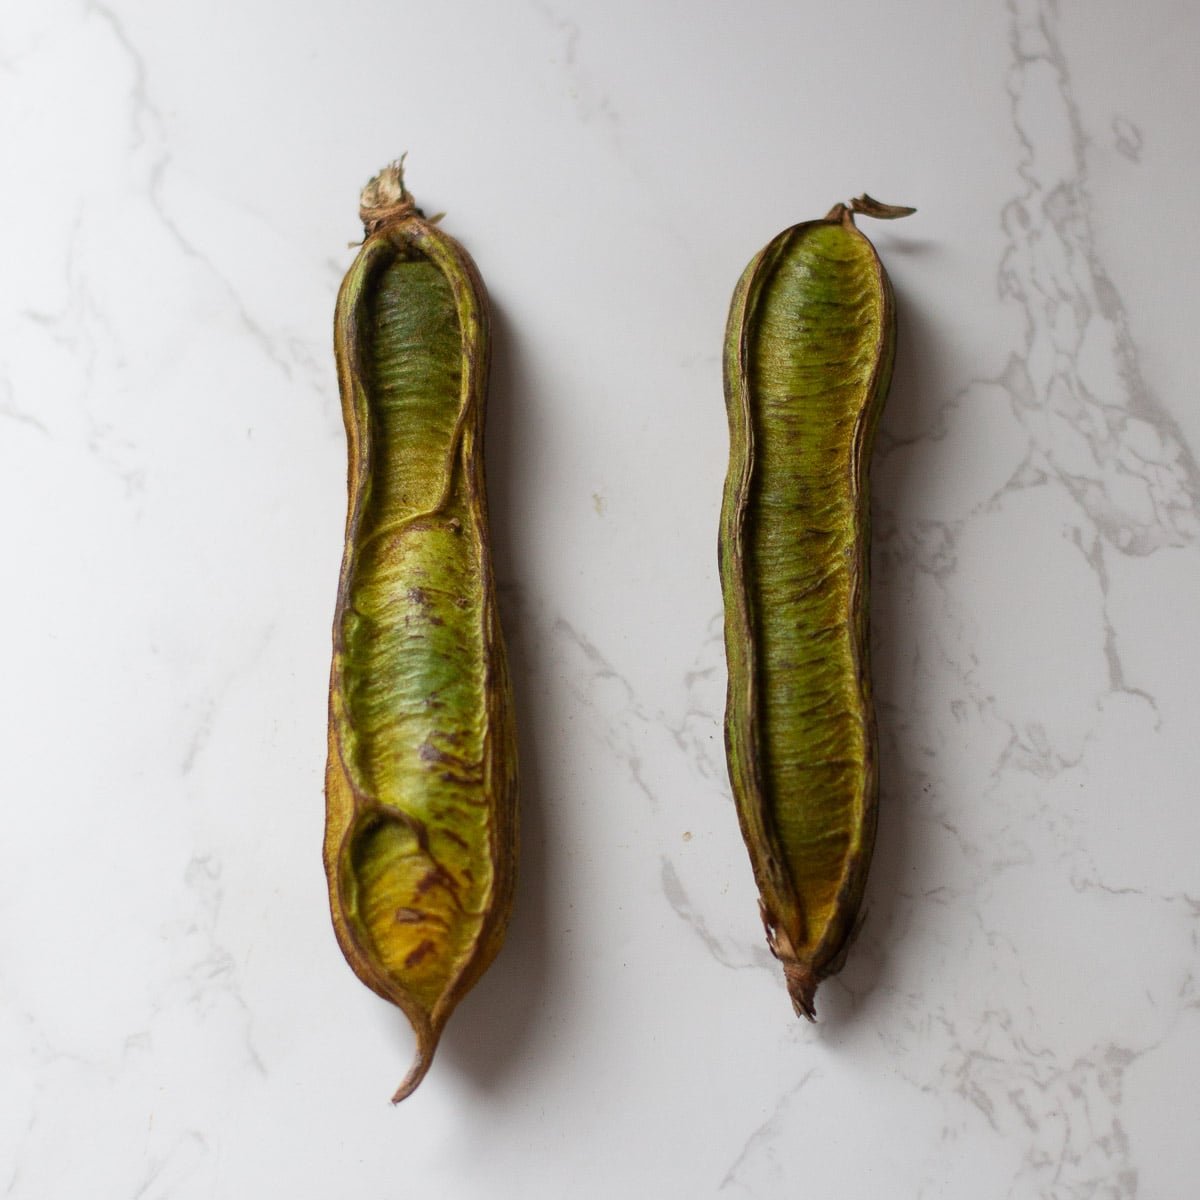 green exterior of two ice cream bean pods